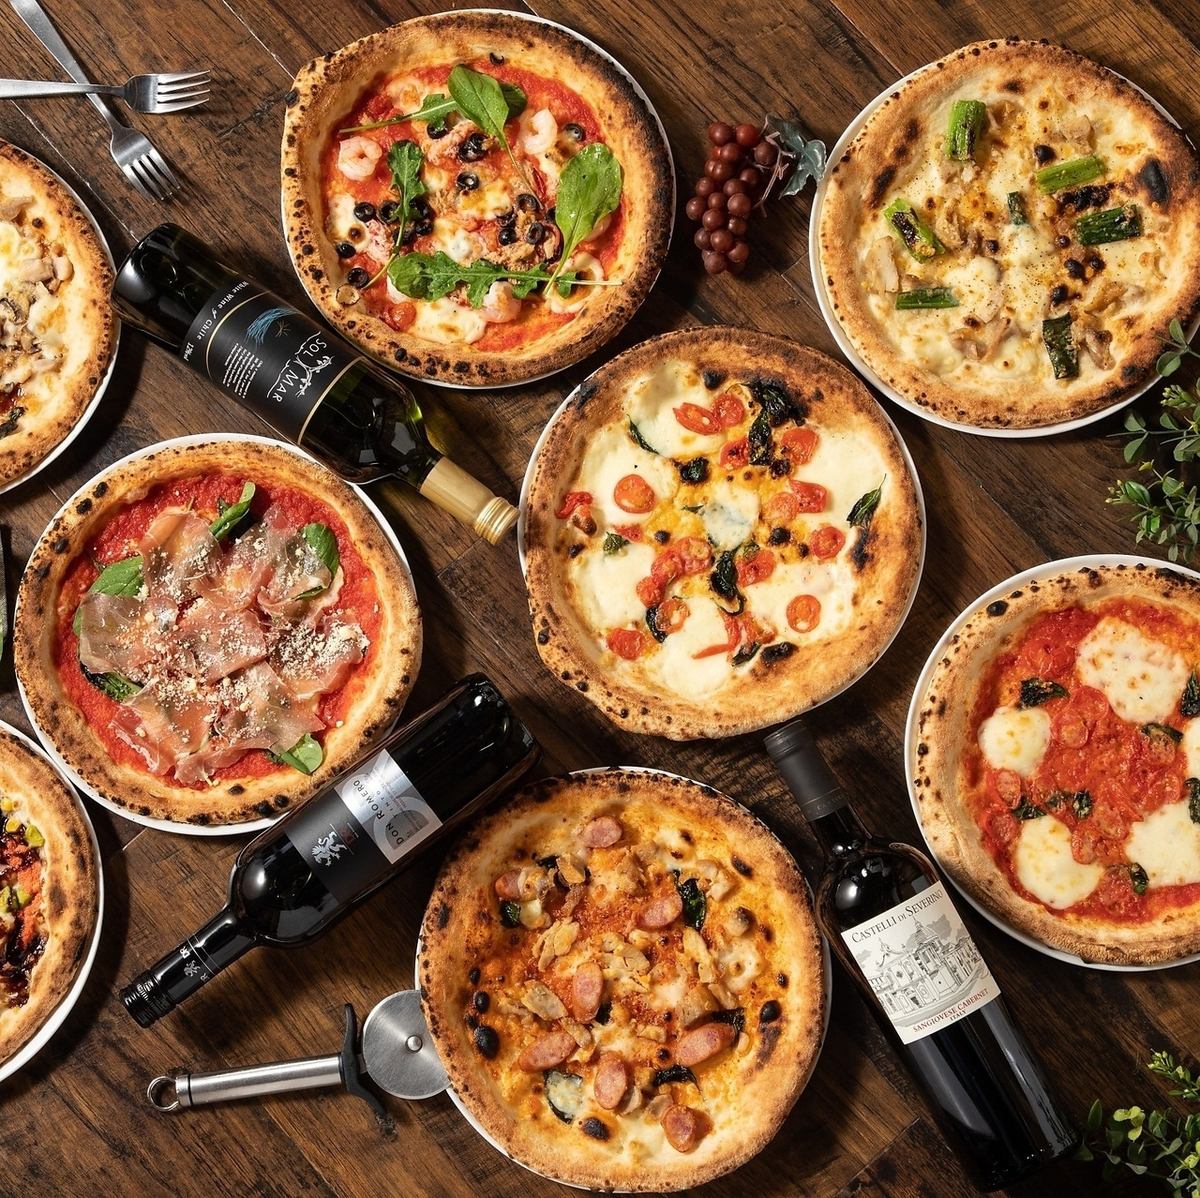 Homemade pizza baked in a kiln ♪ Enjoy a moment with à la carte and carefully selected wine ◎